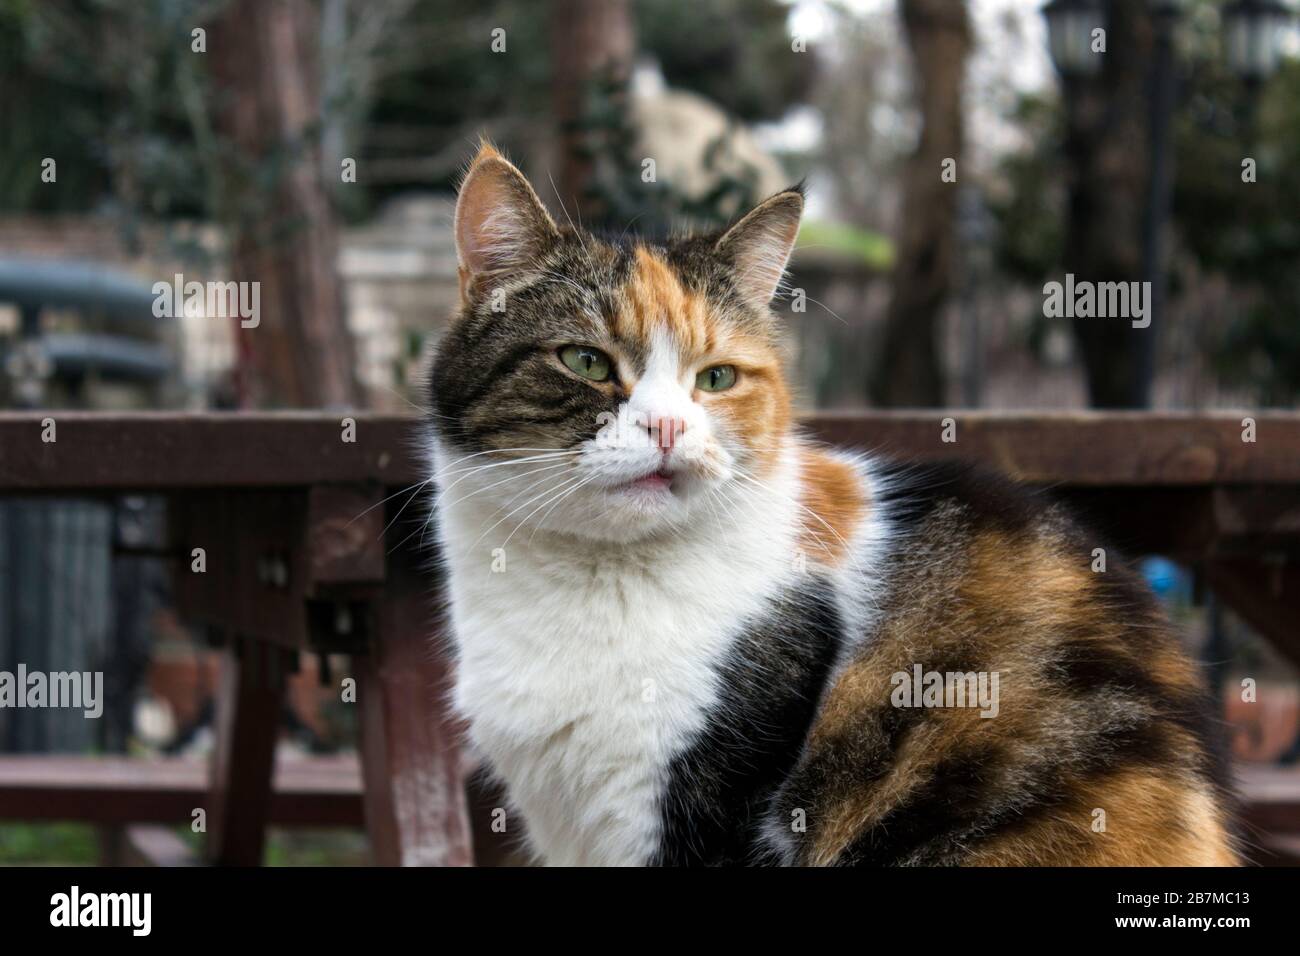 Outdoors profile portrait of a stray calico cat with natural facial imperfections, making it seem like a bored, sour cat. Stock Photo